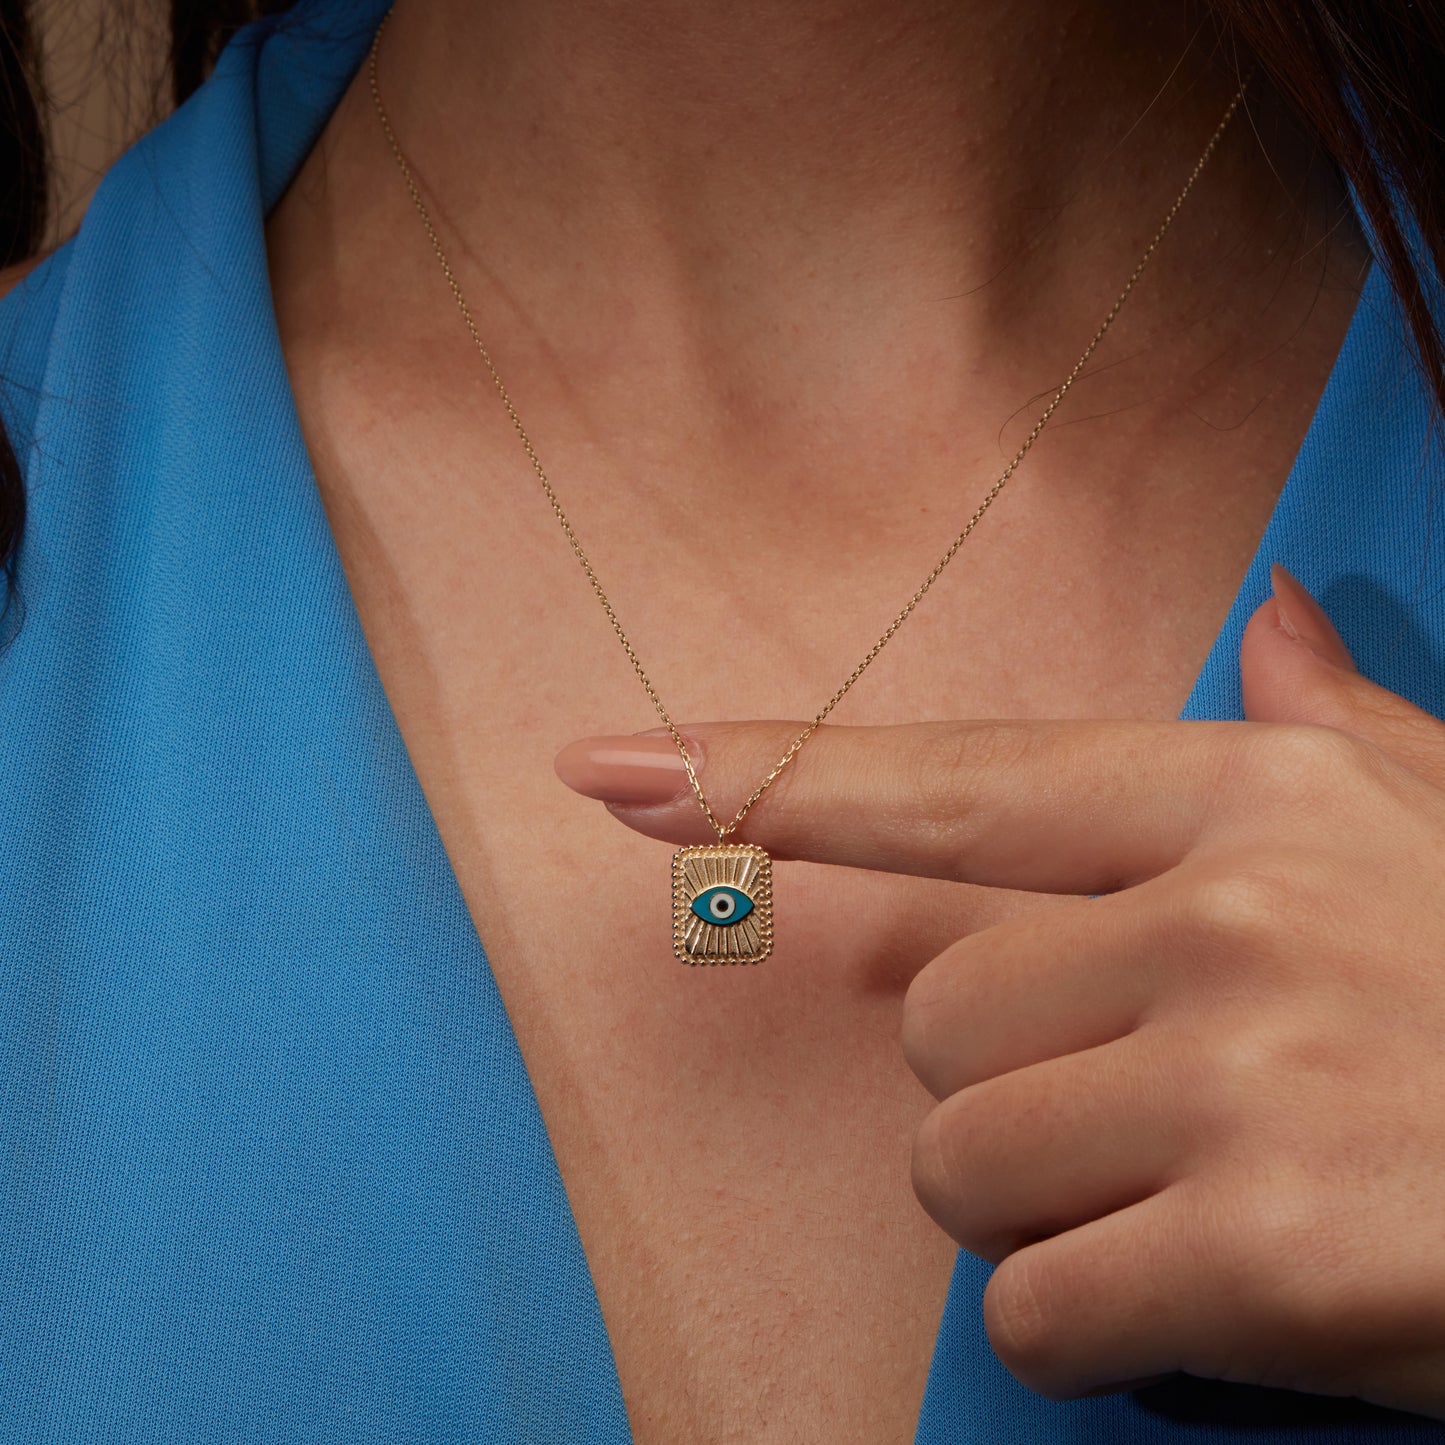 protection necklace, evil eye necklace, evil eye jewelry, solid gold pendant, solid gold necklace, 14k gold necklace, solid gold evil eye, blue gold evil eye, square evil eye gold, evil eye pendant, evil eye amulet, gold necklace womens, kabbalah necklace, 